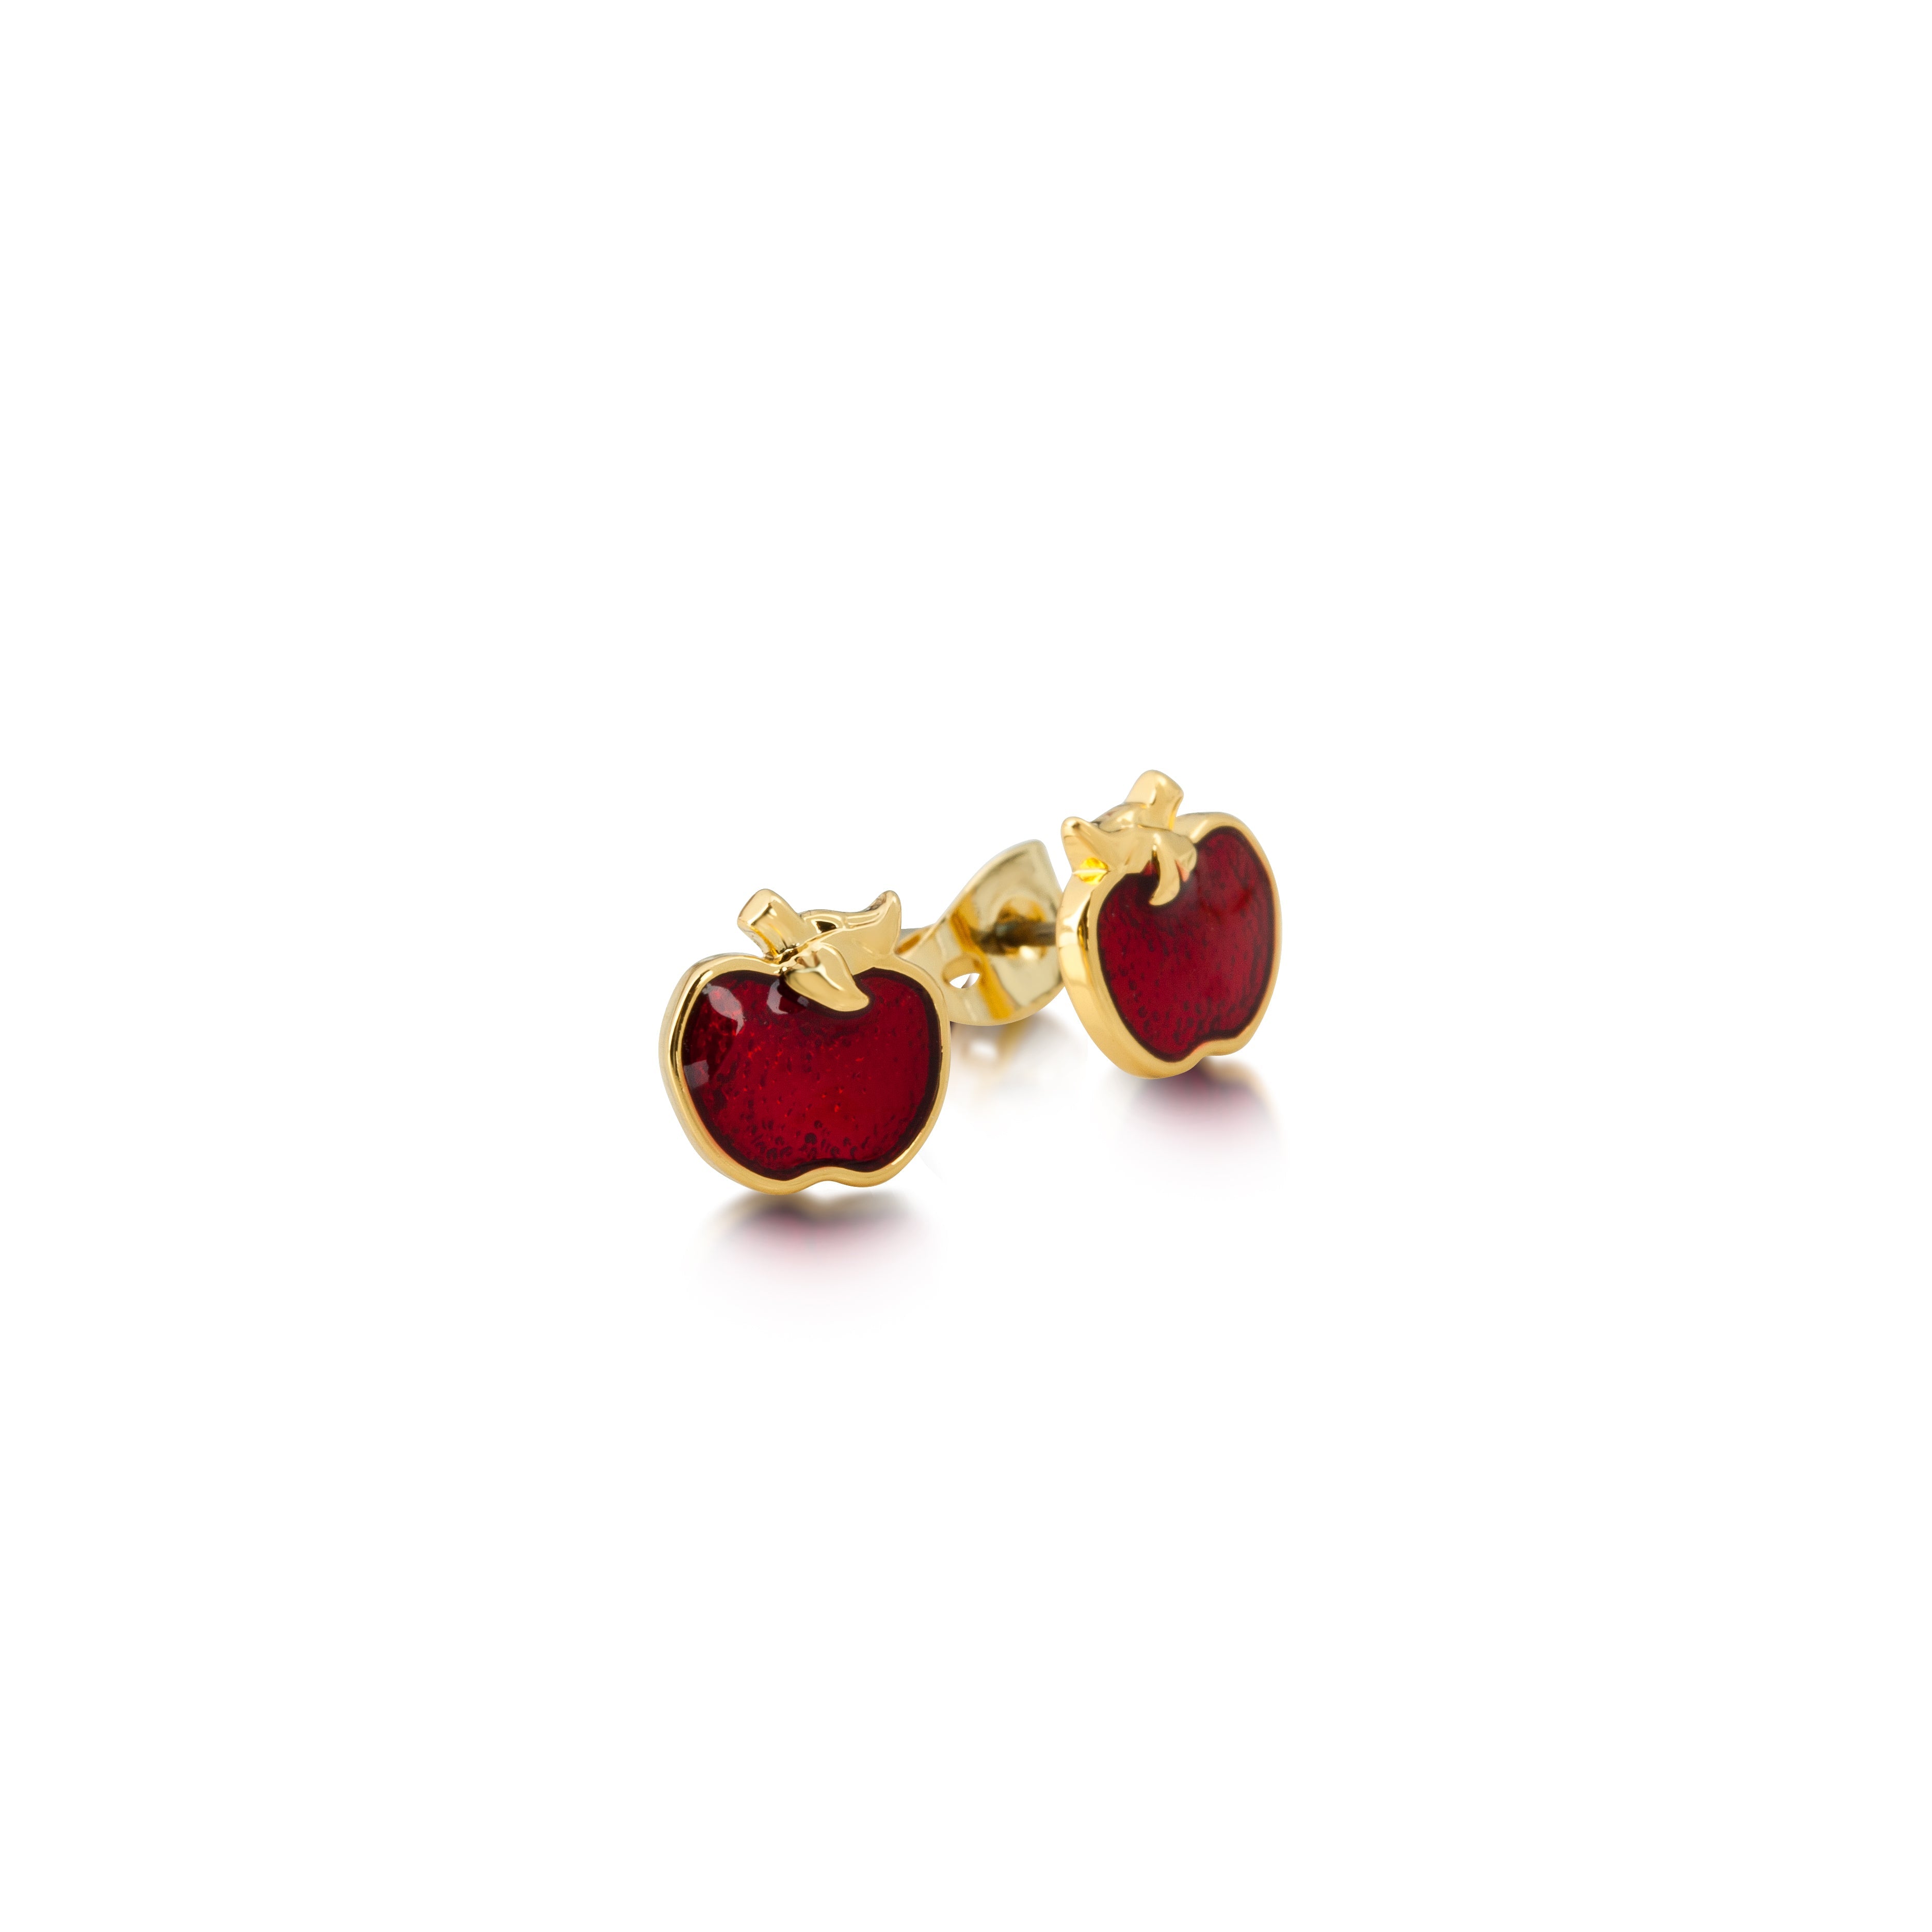 Snow White - Yellow Gold Plated Apple Stud Earrings